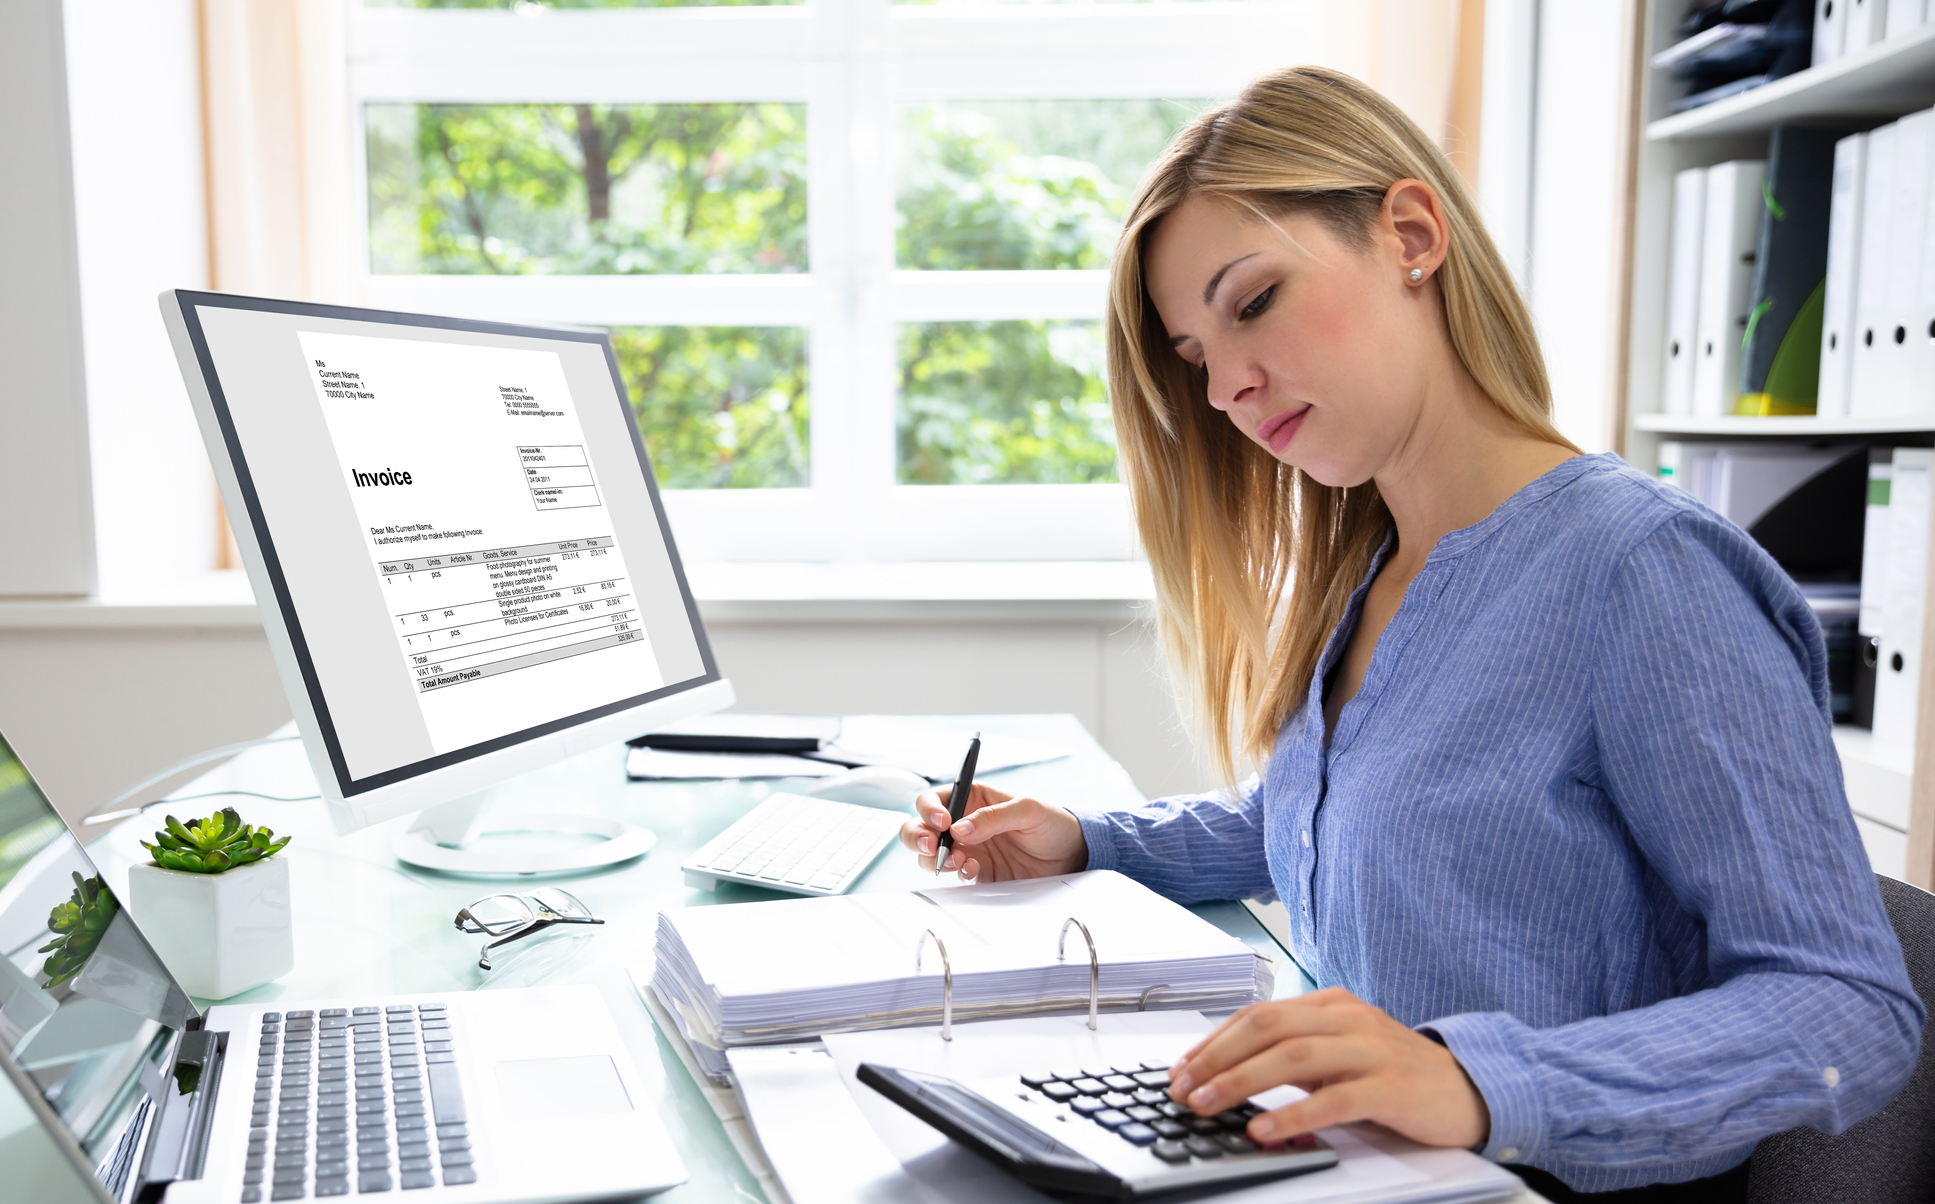 Medical Billing And Coding From Home How To Start